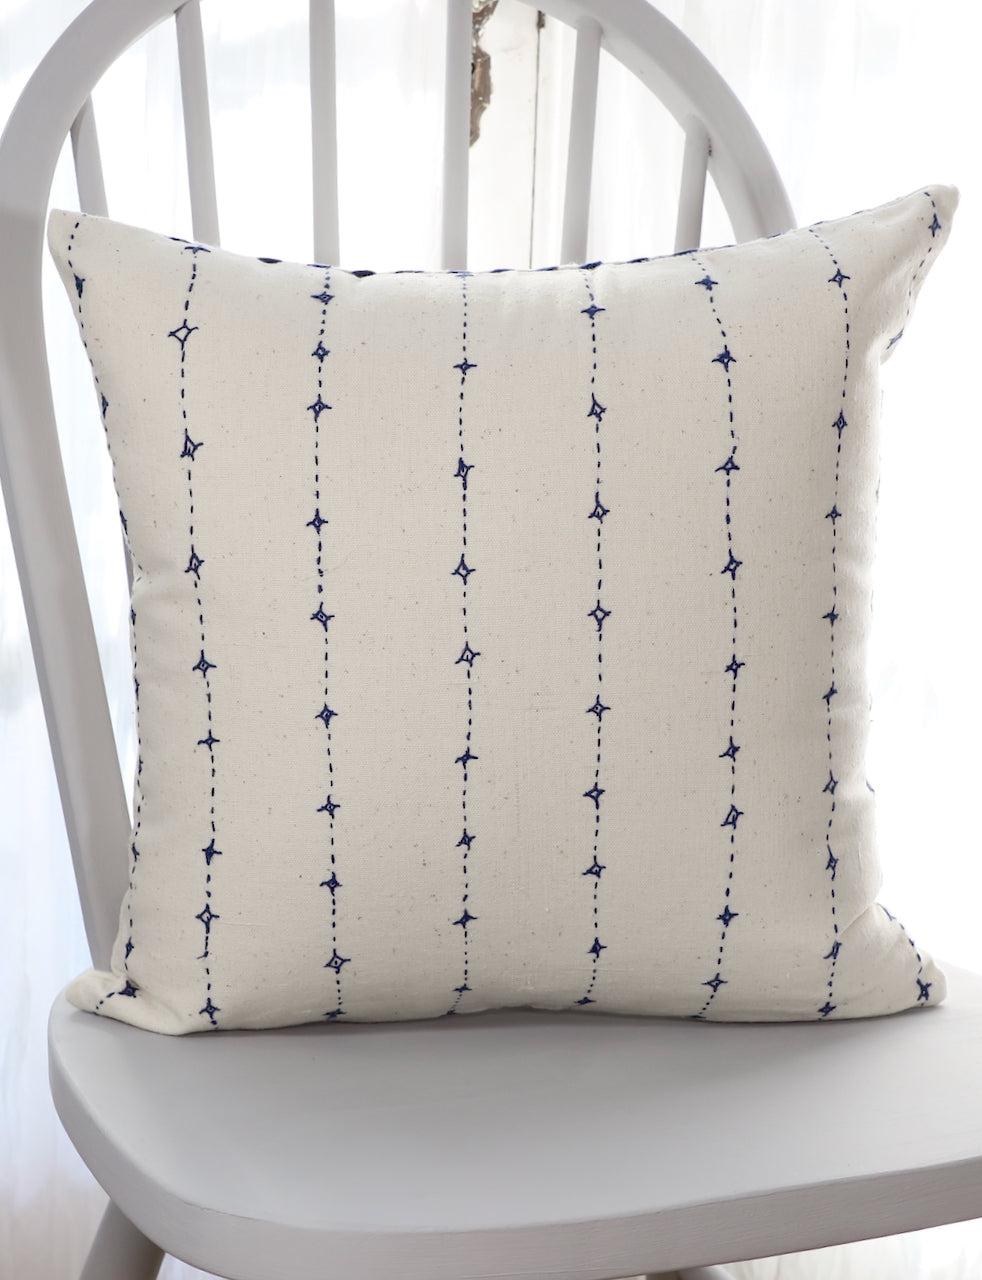 Celestea Throw Pillow Cover - Passion Lilie - Fair Trade - Sustainable Fashion